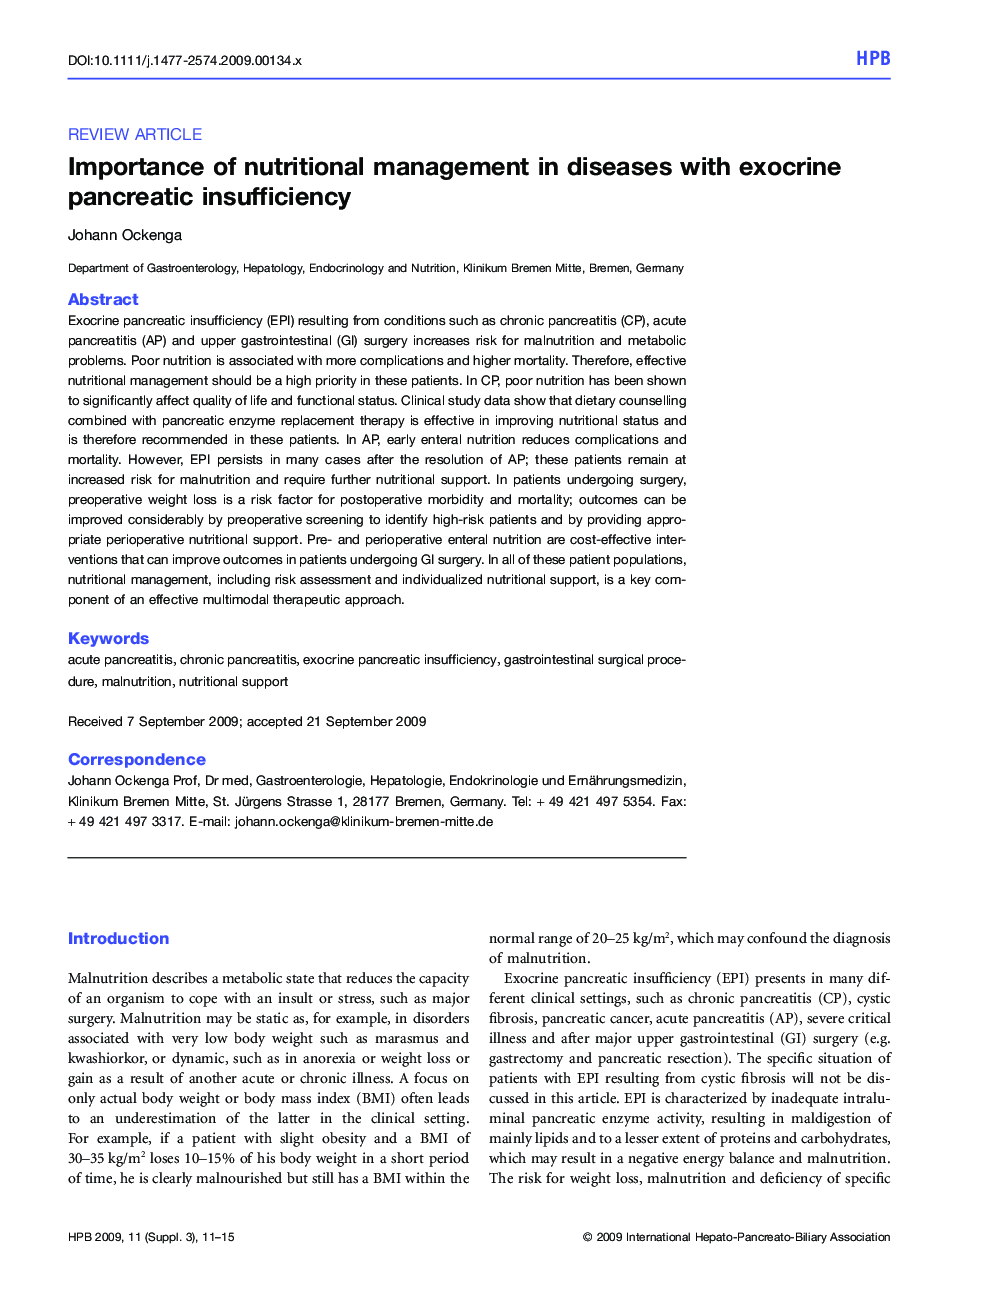 Importance of nutritional management in diseases with exocrine pancreatic insufficiency